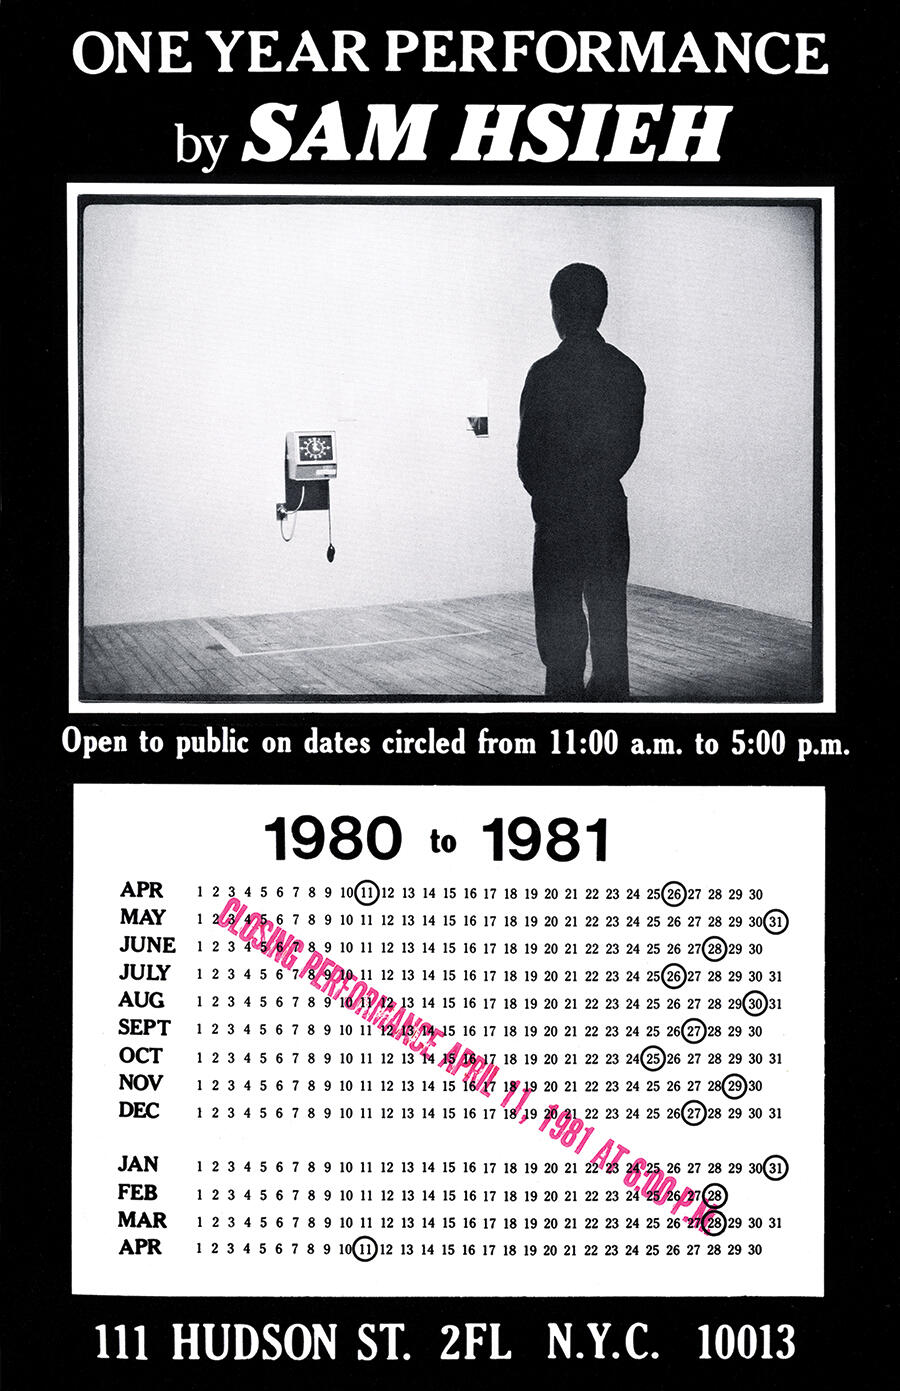 tehching-hsieh-one-year-performance-1980-1981